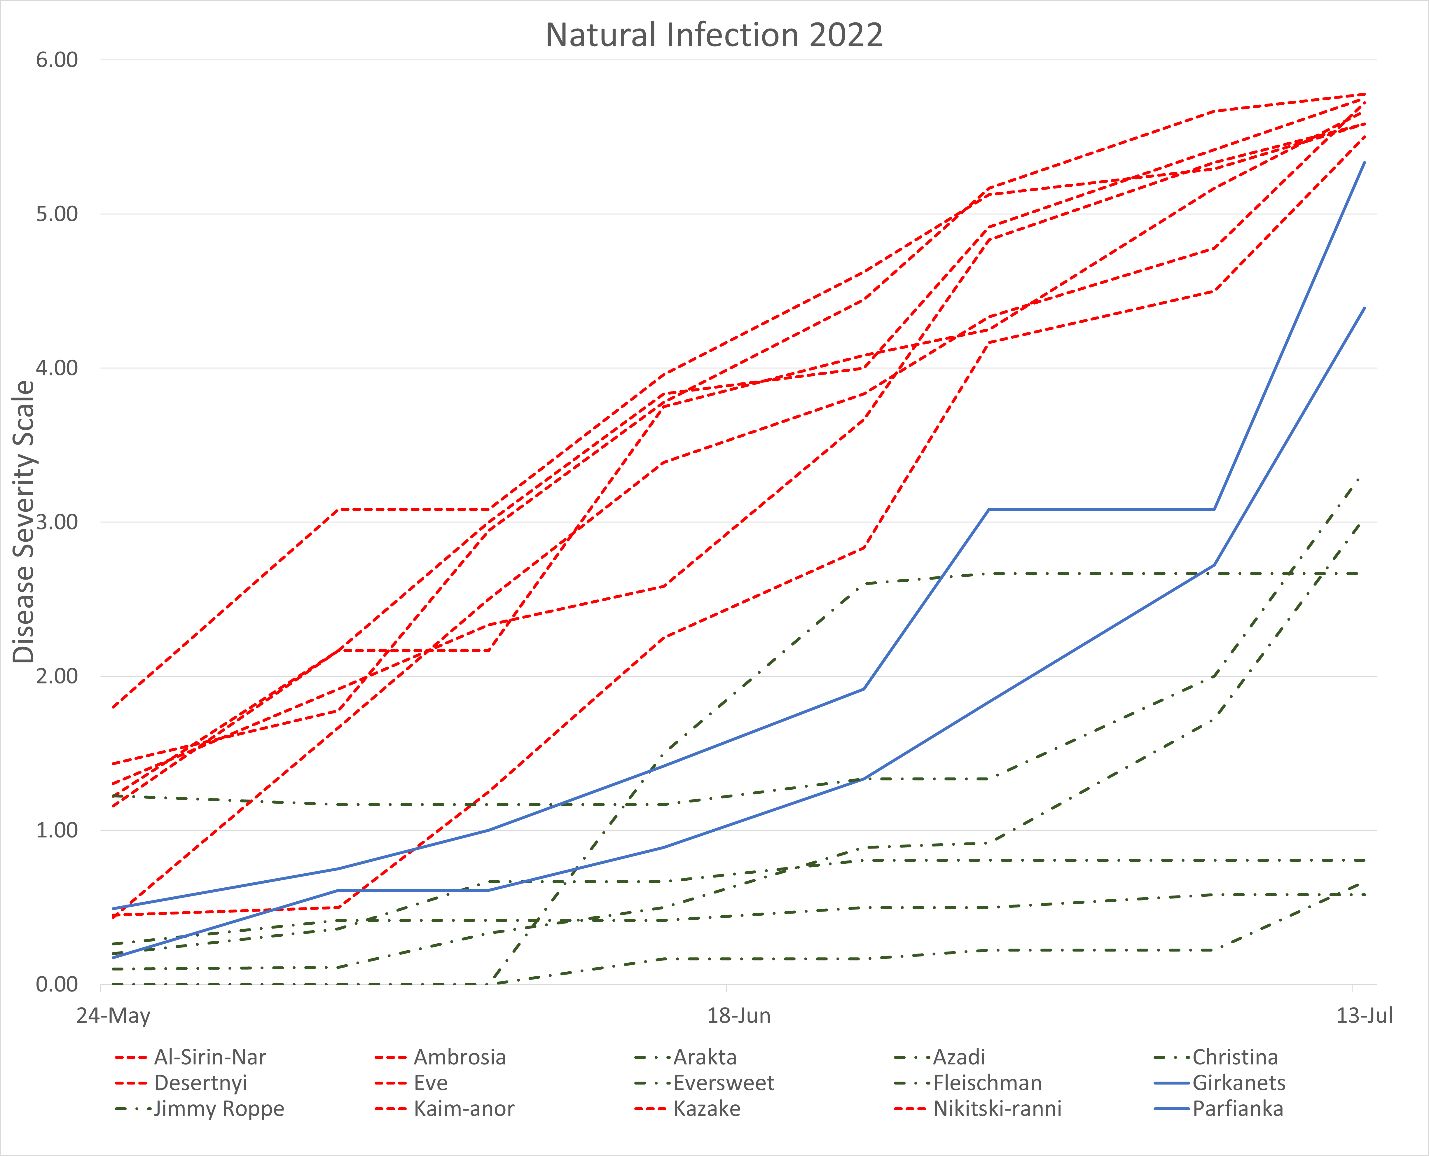 Anthracnose progression under natural infection for the 2022 growing season. Horizontal axis—May 24 to July 13, 2022. Vertical axis—Anthracnose severity scale from 0 to 6.  